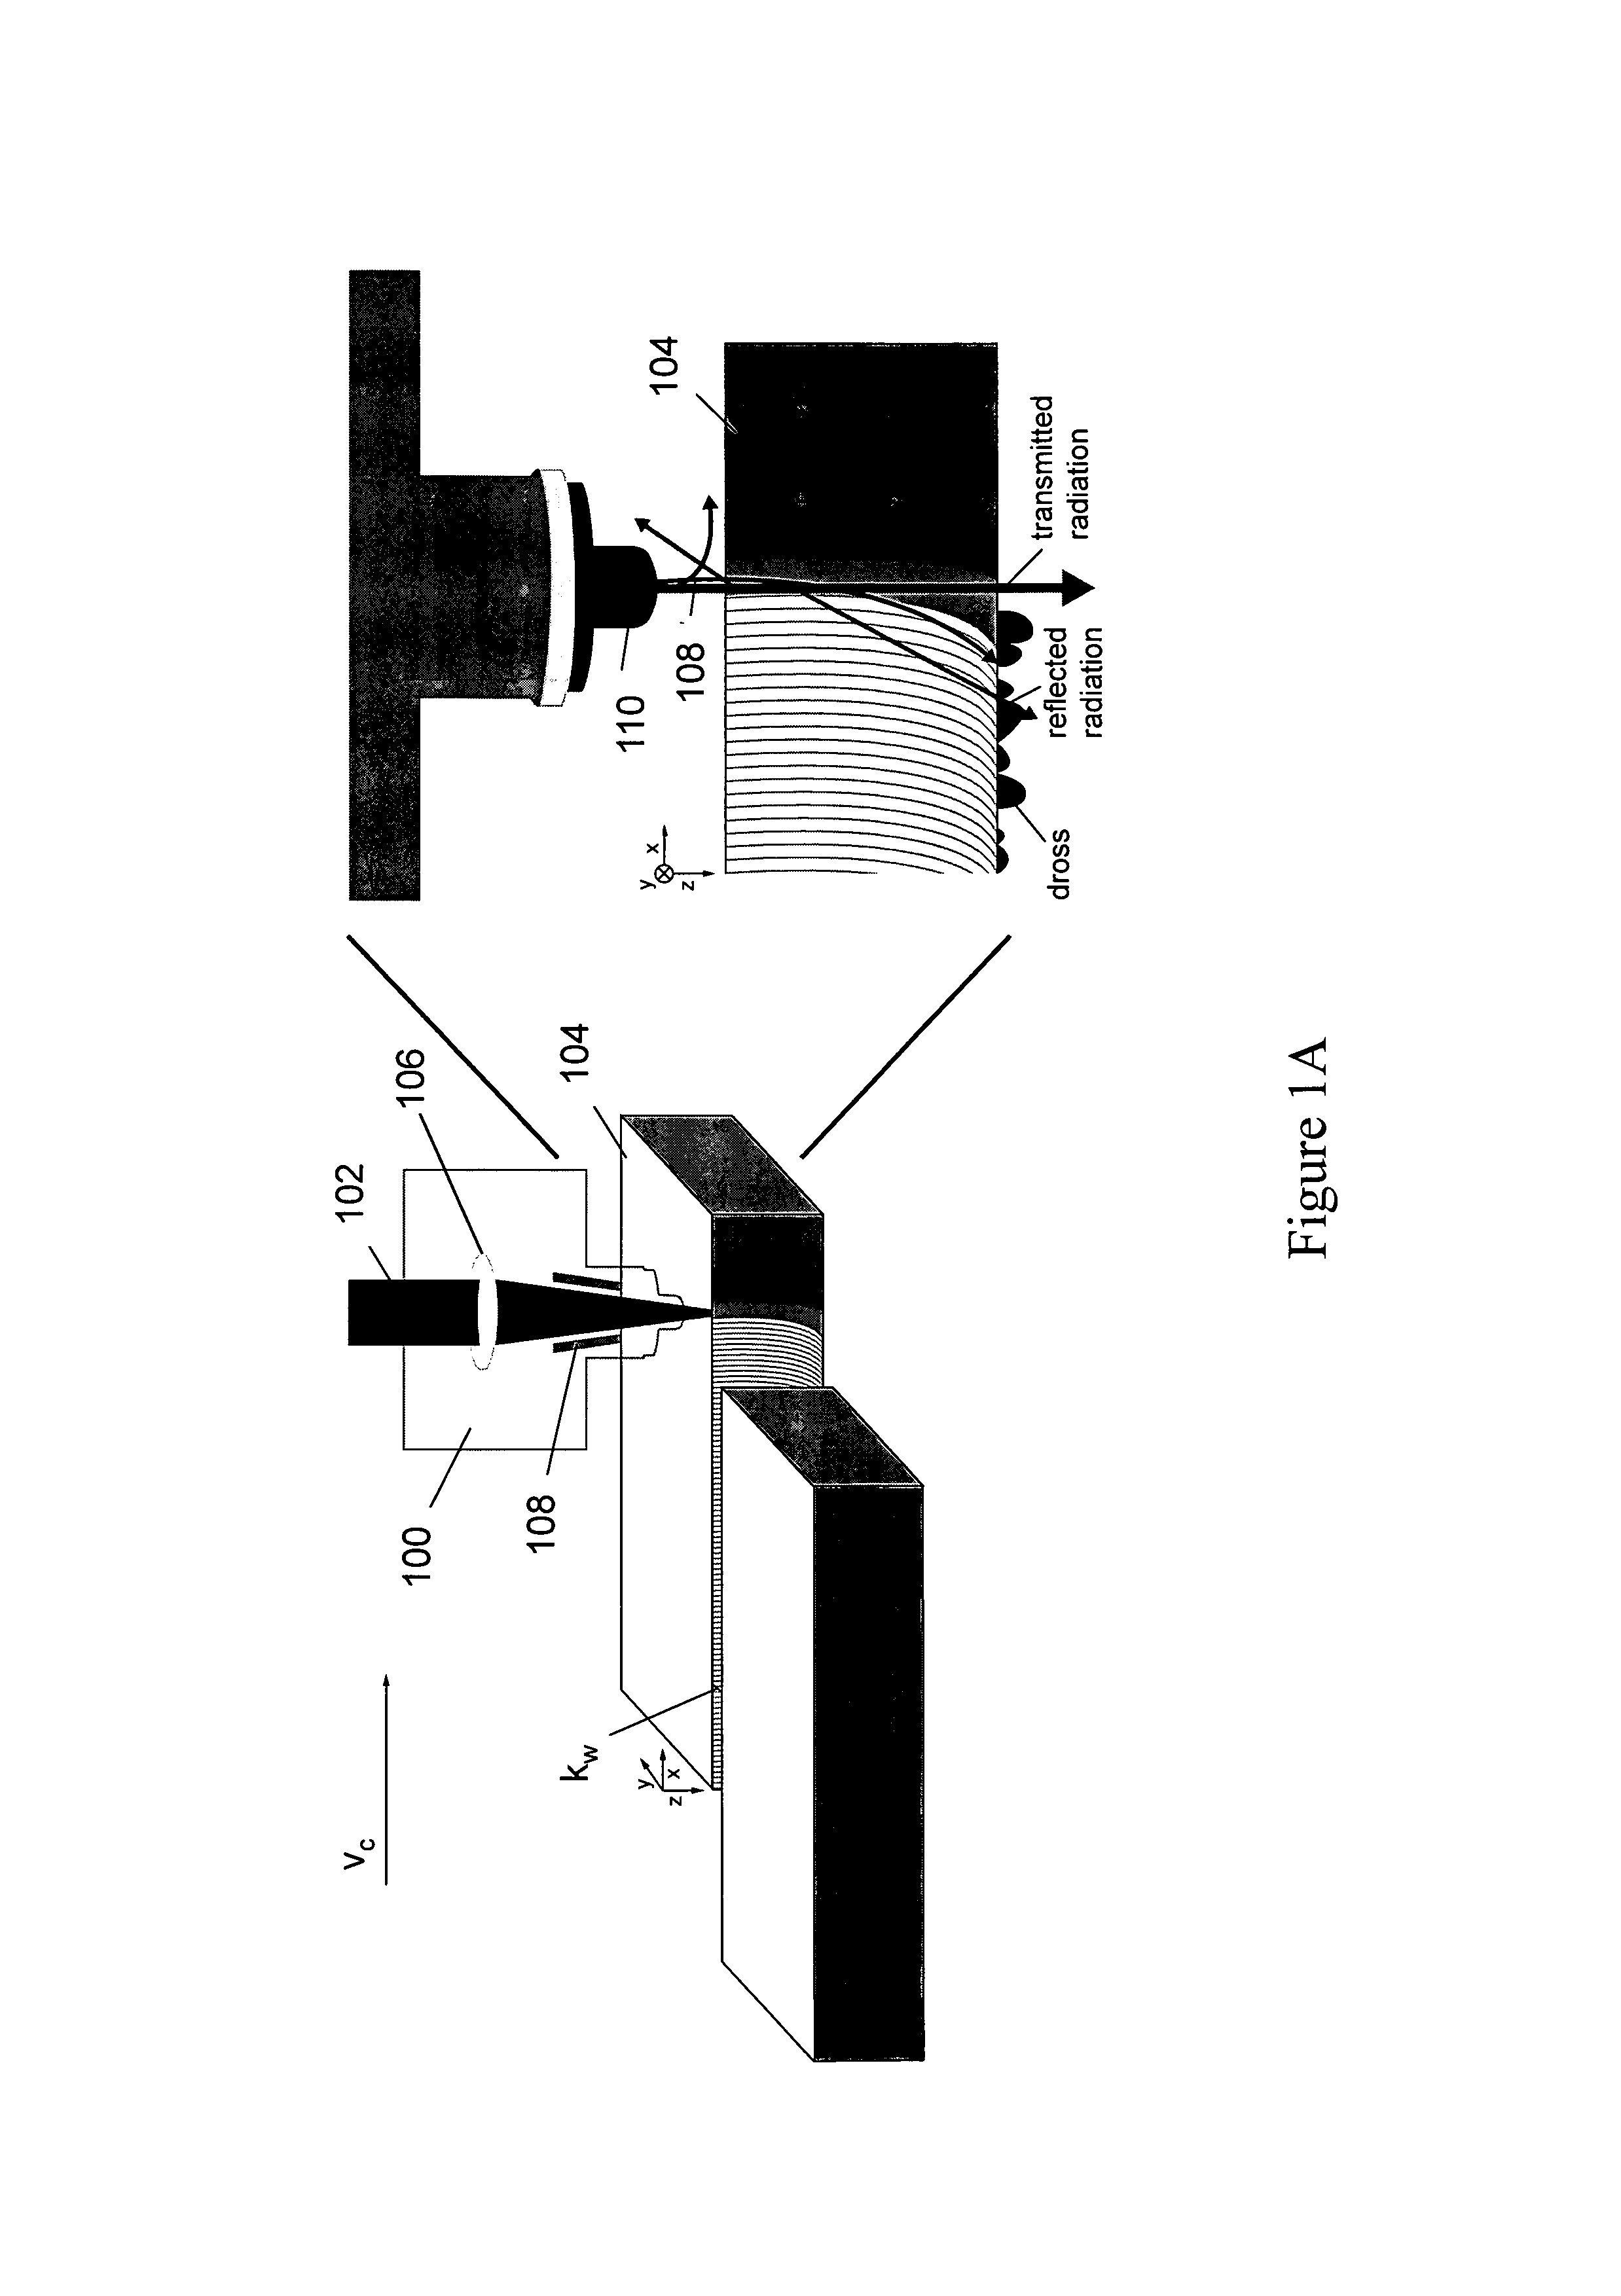 Method for controlling a laser processing operation by means of a reinforcement learning agent and laser material processing head using the same